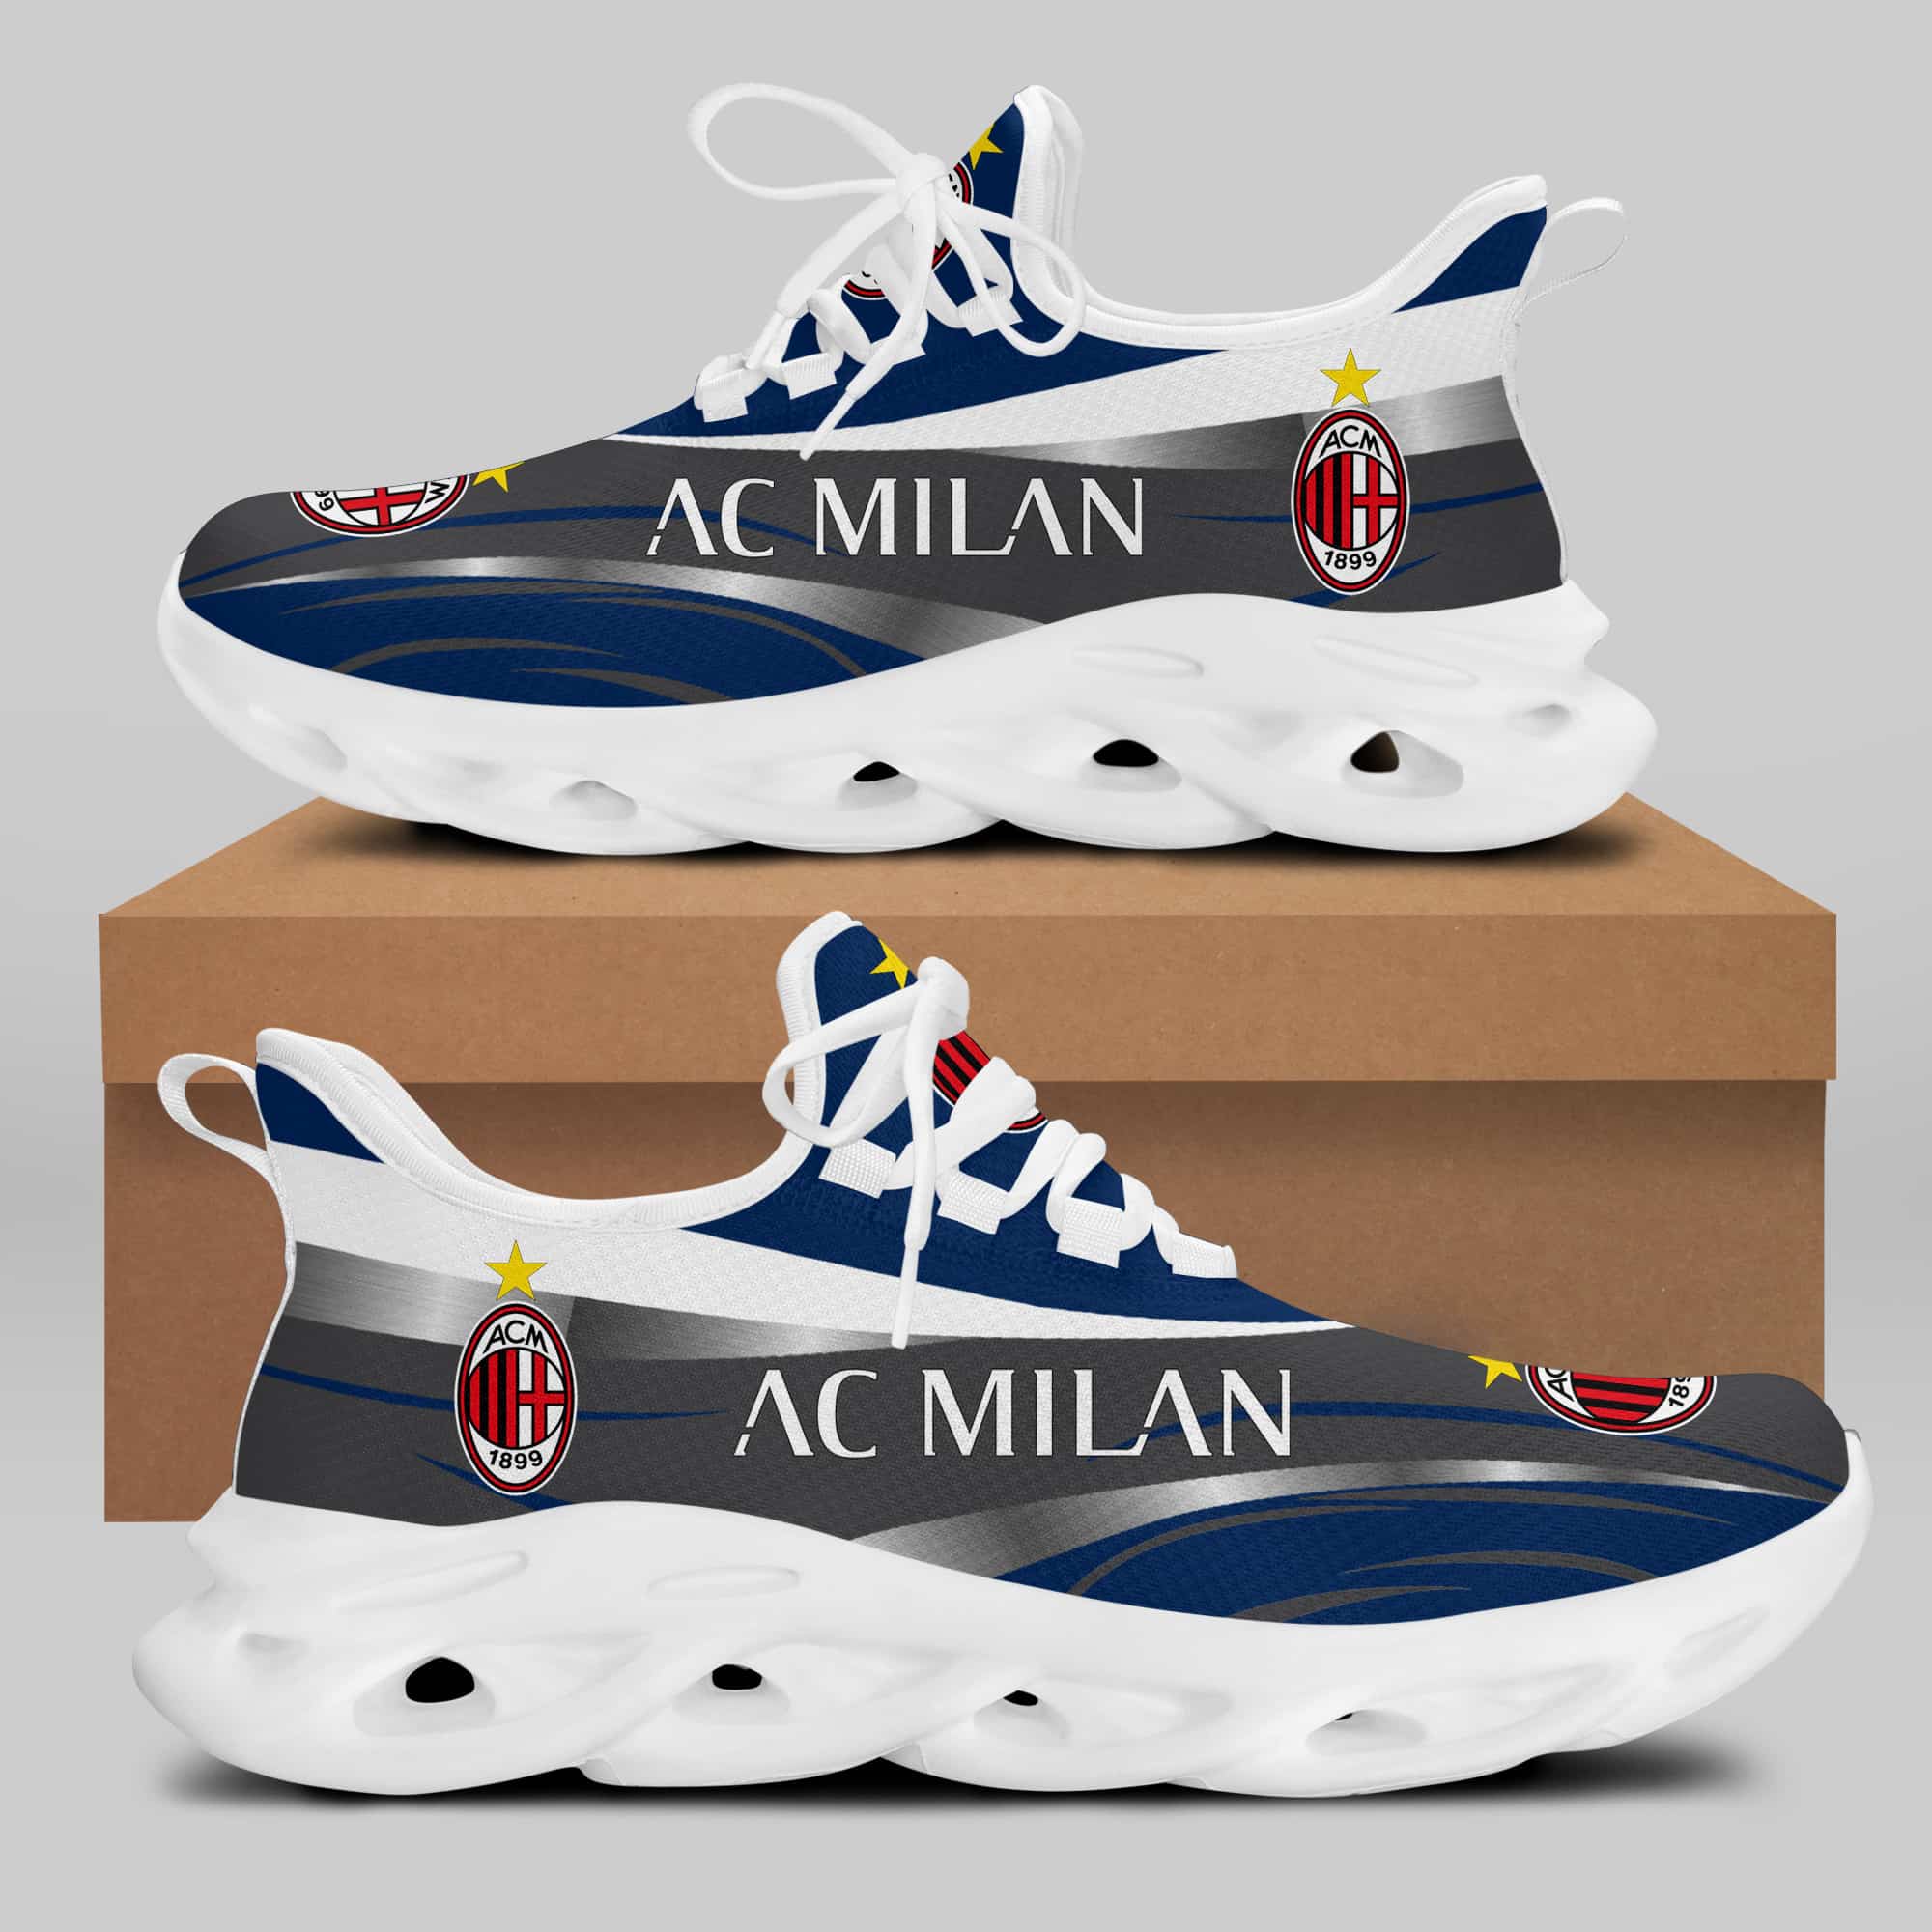 Ac Milan Running Shoes Max Soul Shoes Sneakers Ver 32 1